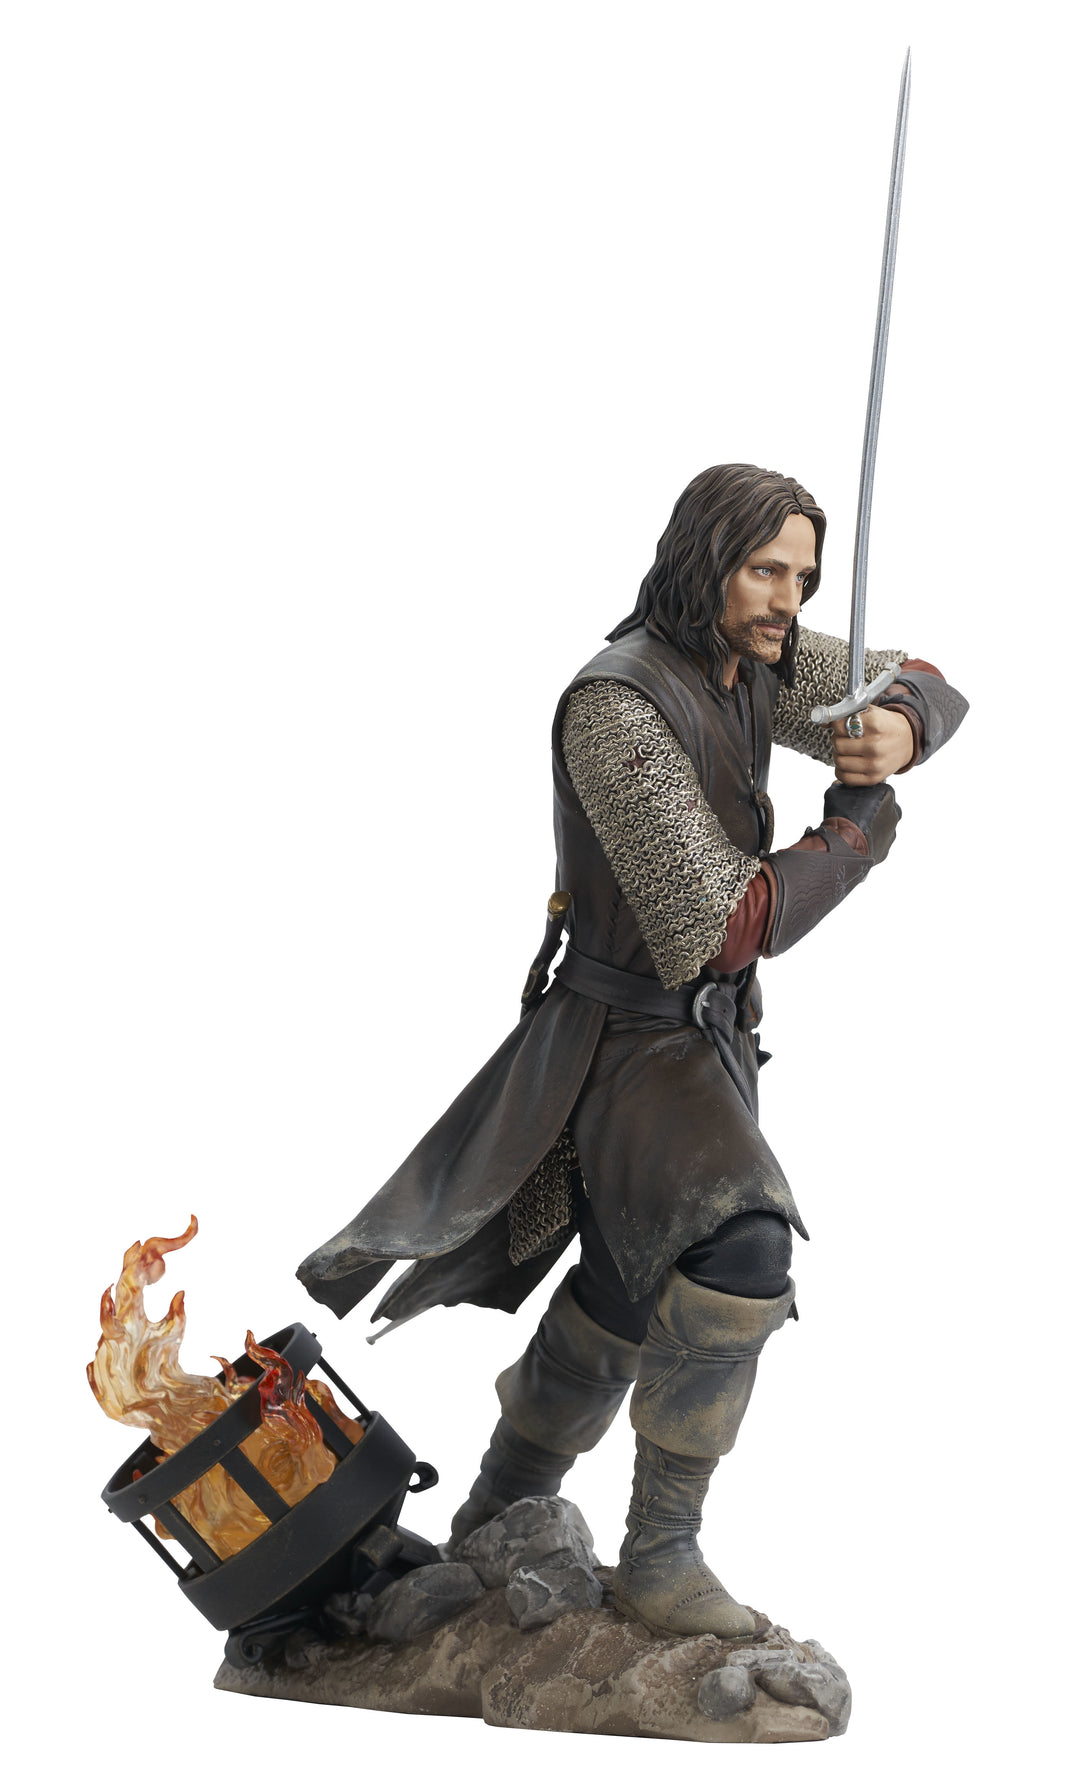 Diamond Select The Lord of the Rings Gallery Aragorn Figure Diorama